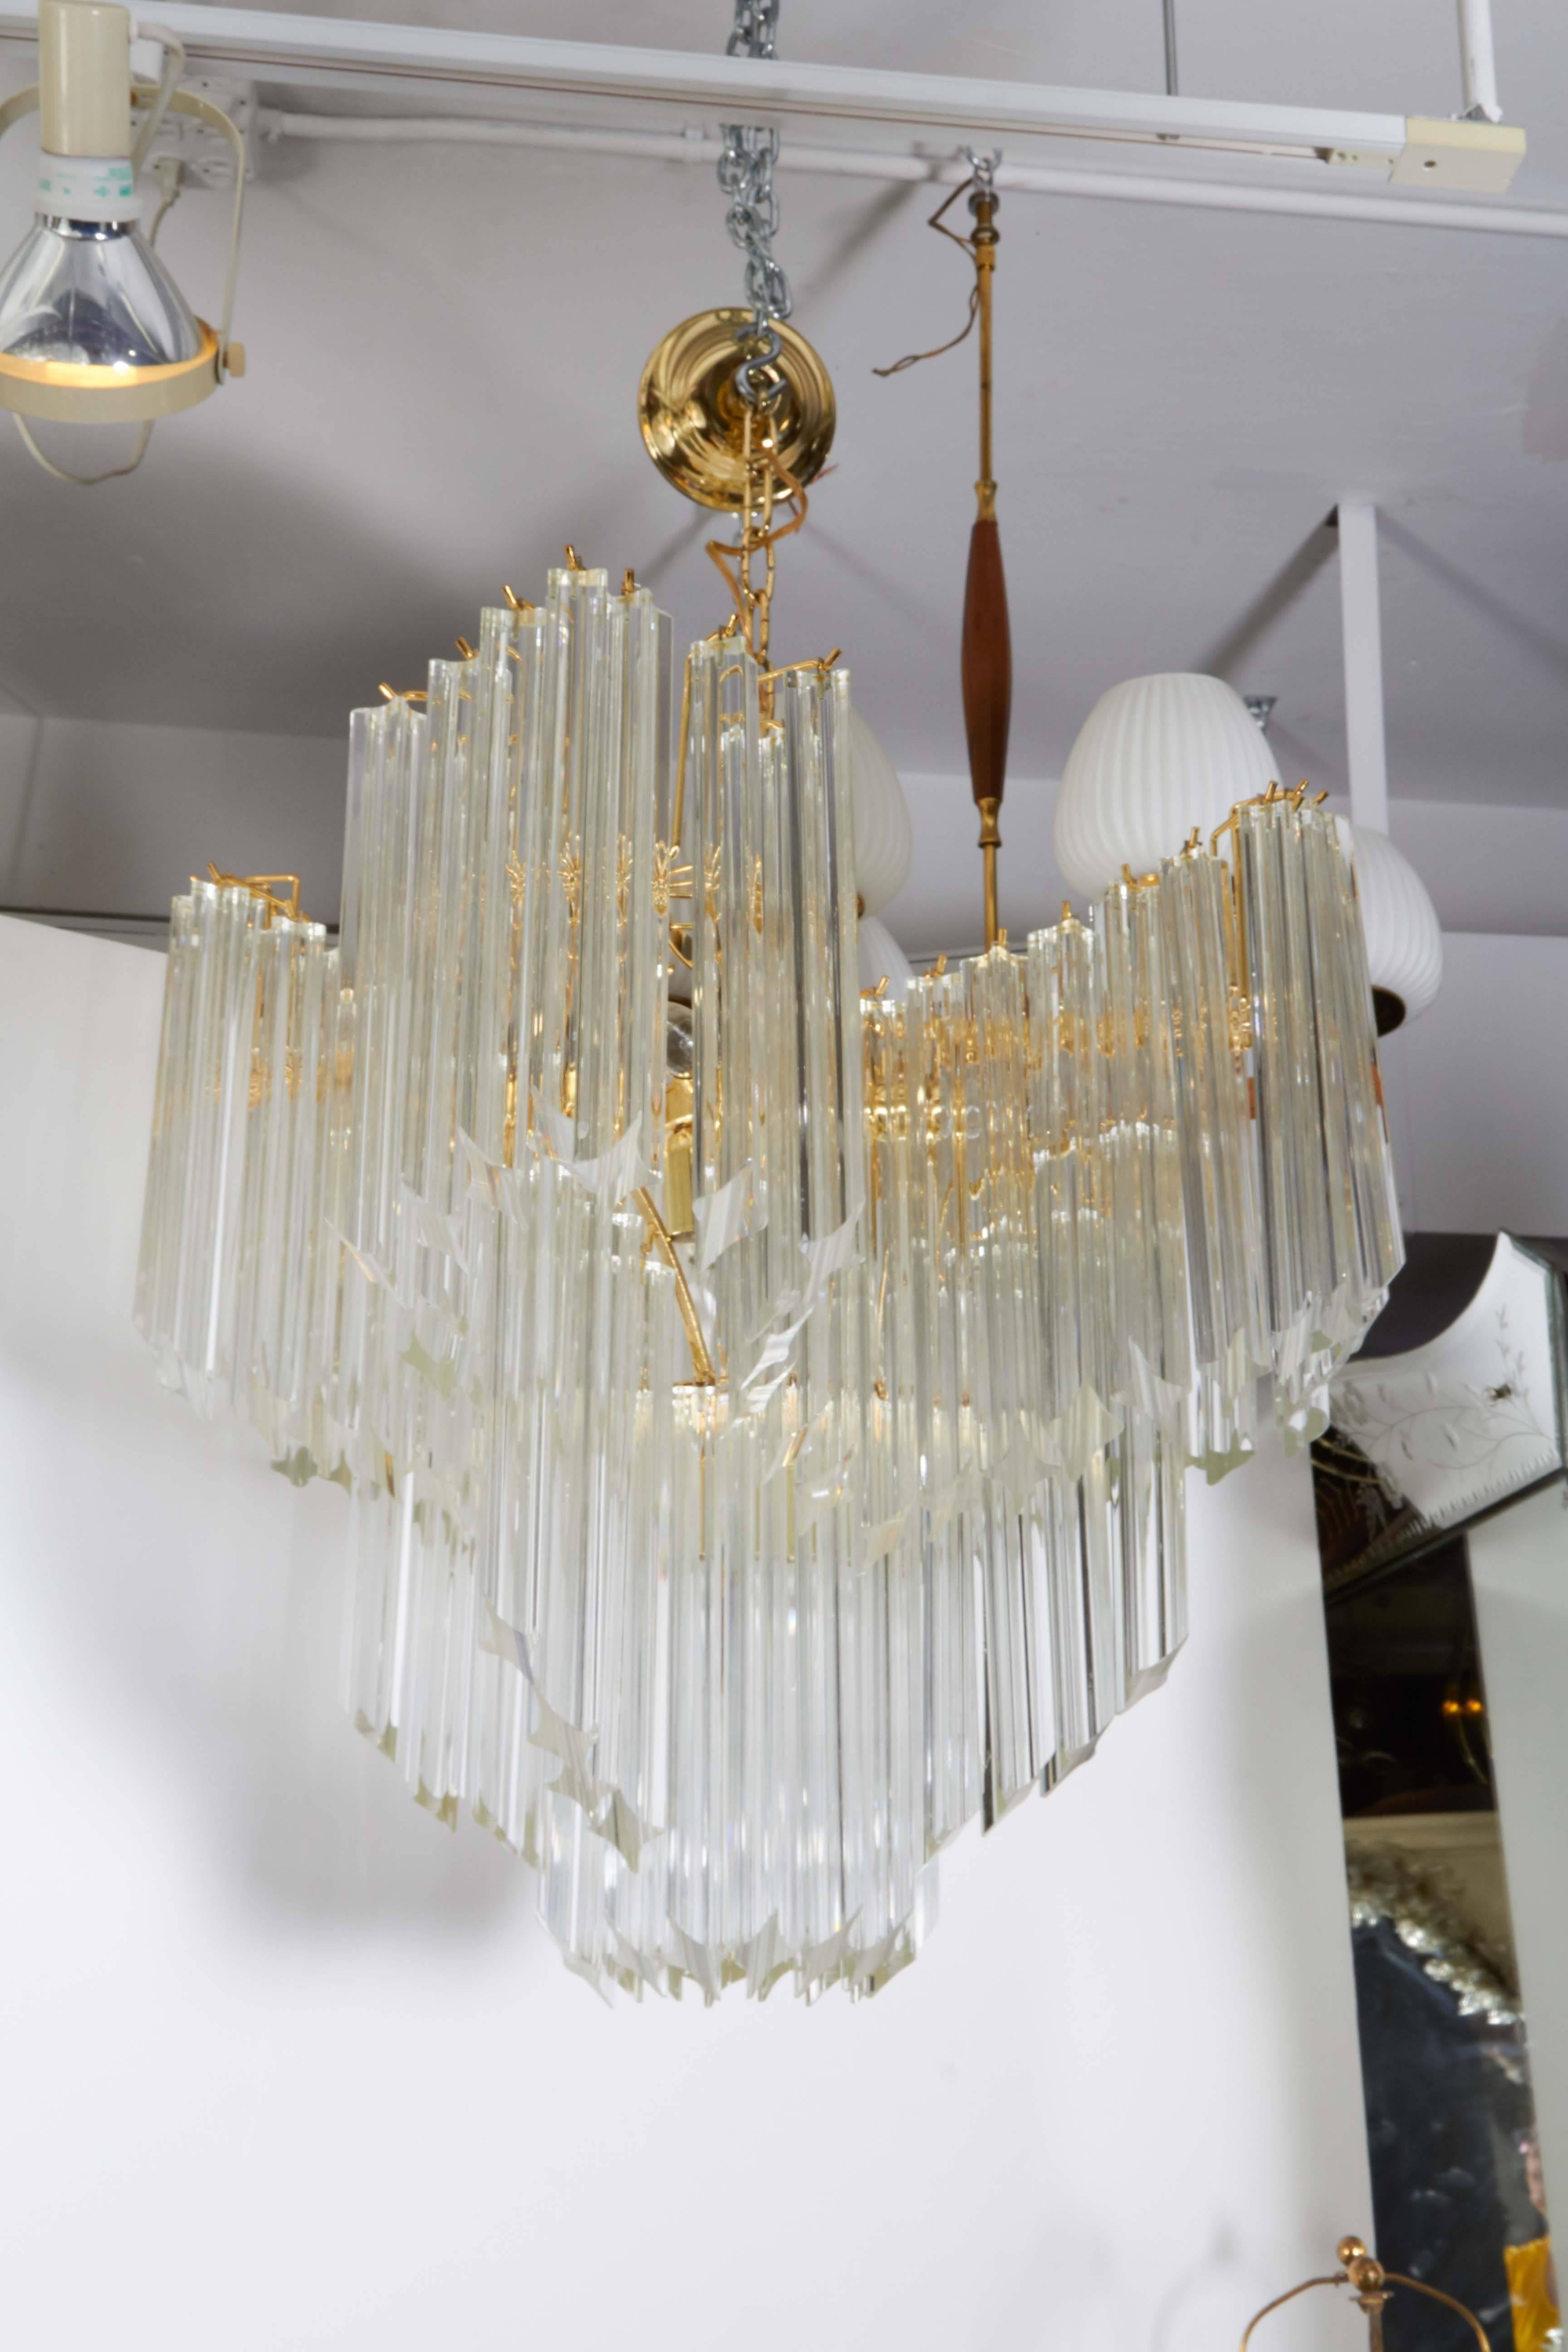 A modern style Italian chandelier by Venini, produced circa 1970s, with Murano glass quatro punta prisms, suspended from an elaborate star form brass frame. Very good vintage condition, wear consistent with age and use.

10773